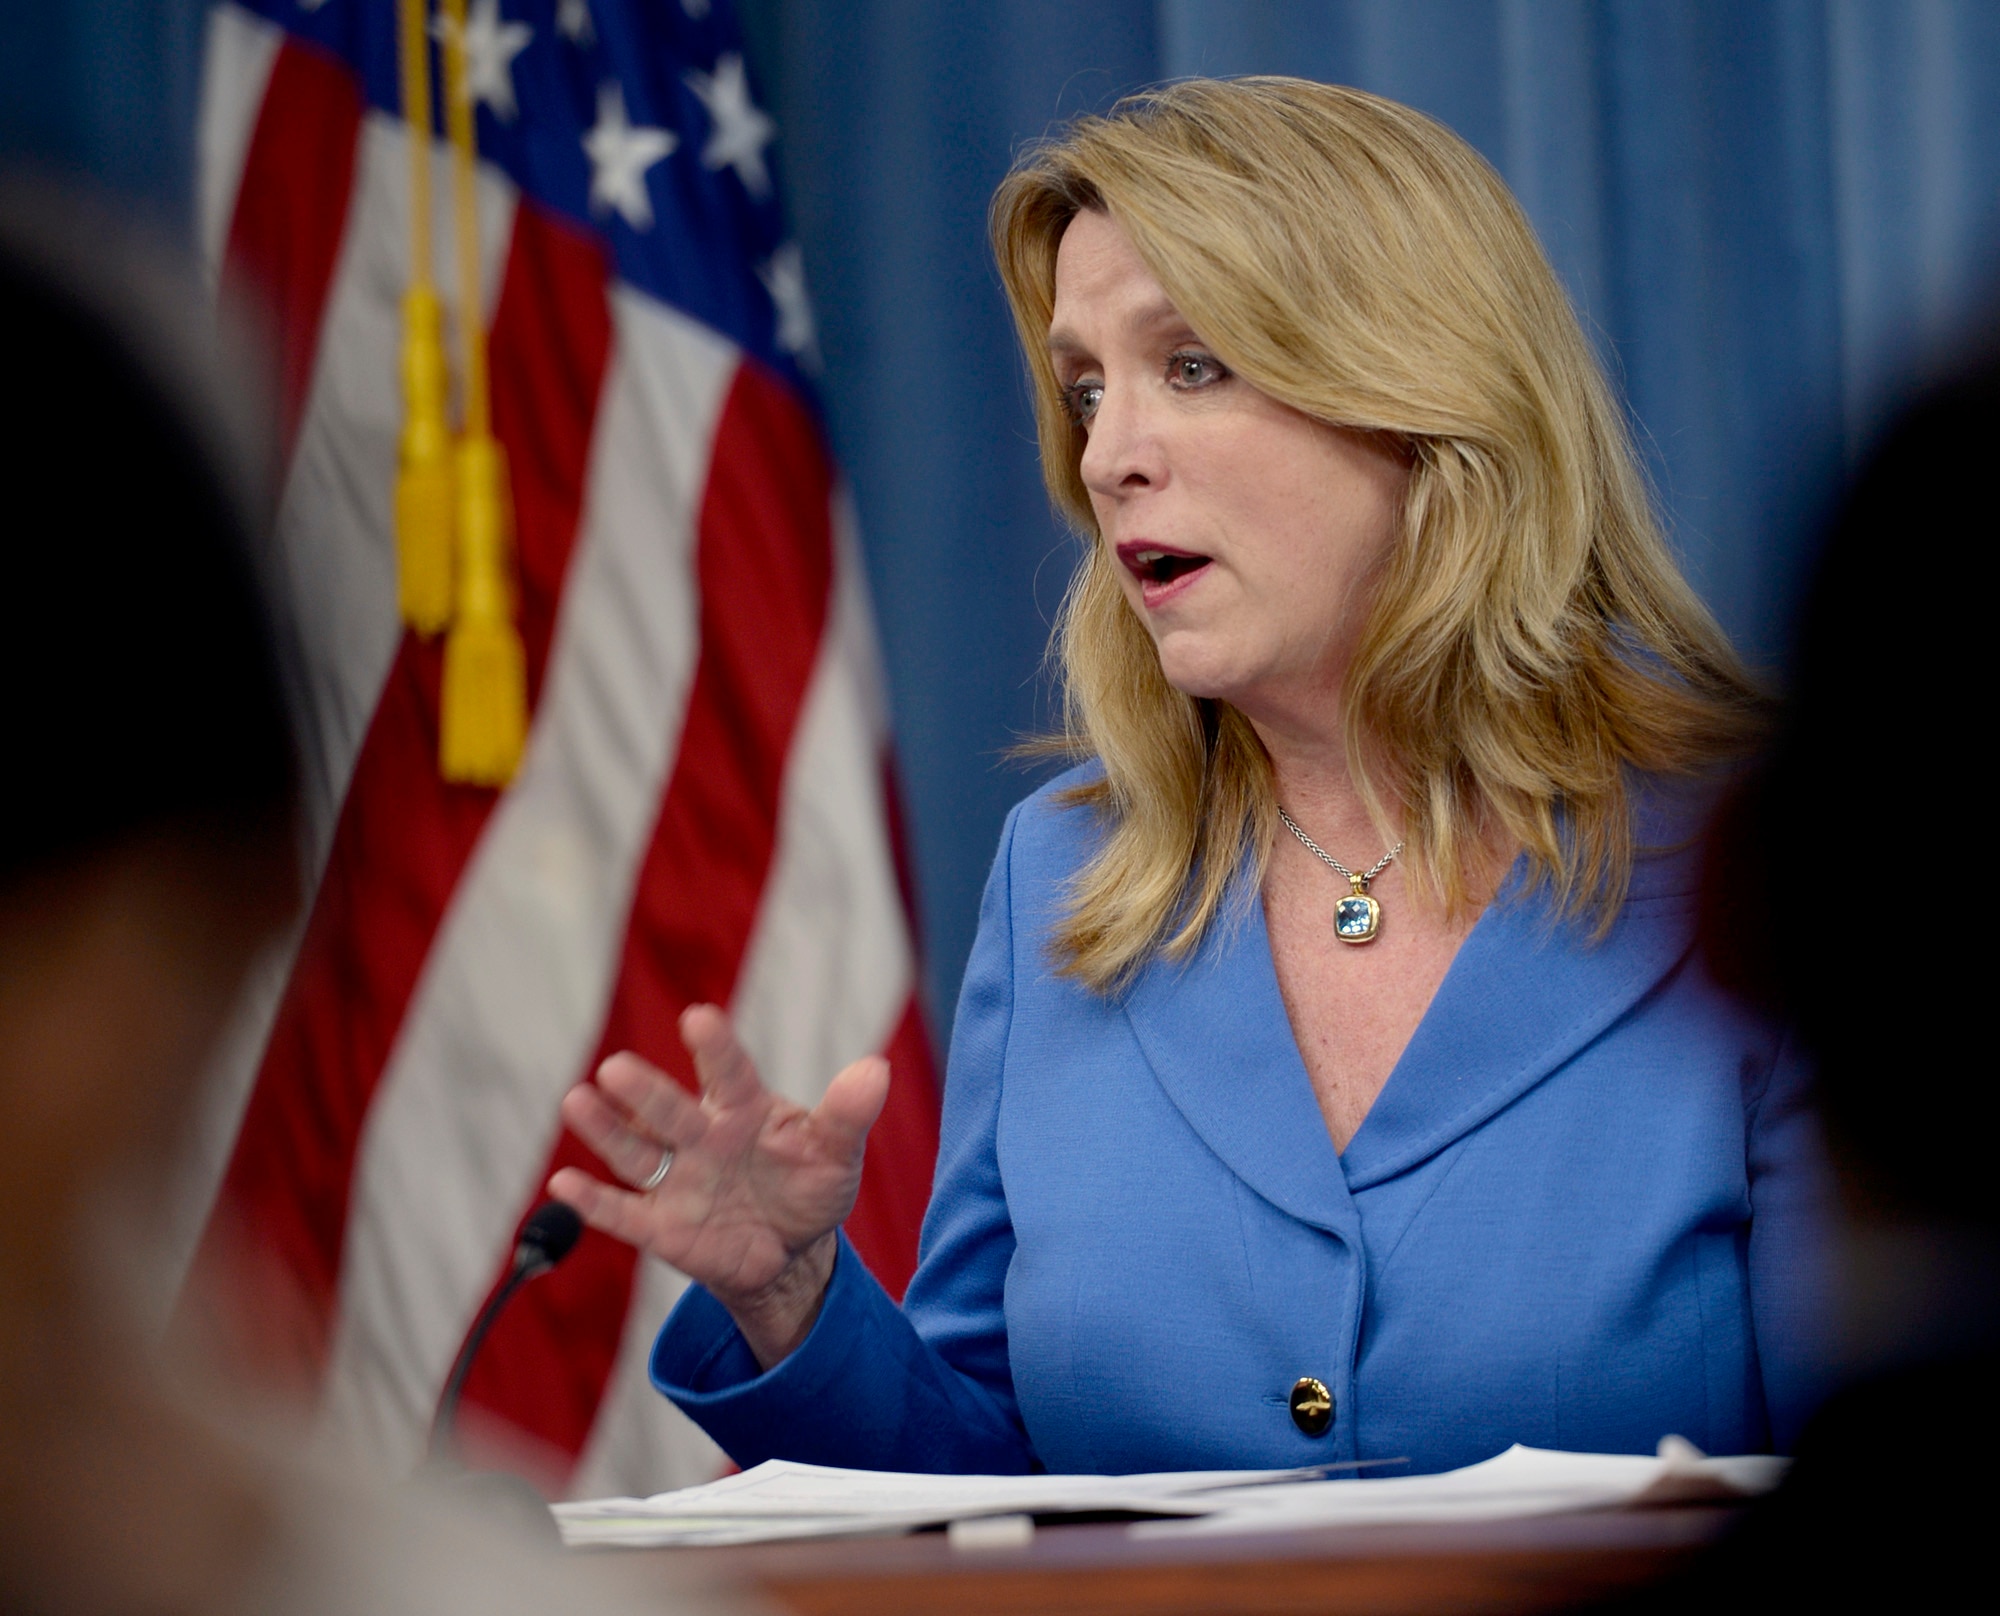 Secretary of the Air Force Deborah Lee James gives a press conference on the "State of the Air Force" in the Pentagon March 7, 2016. (U.S. Air Force photo/Scott M. Ash)